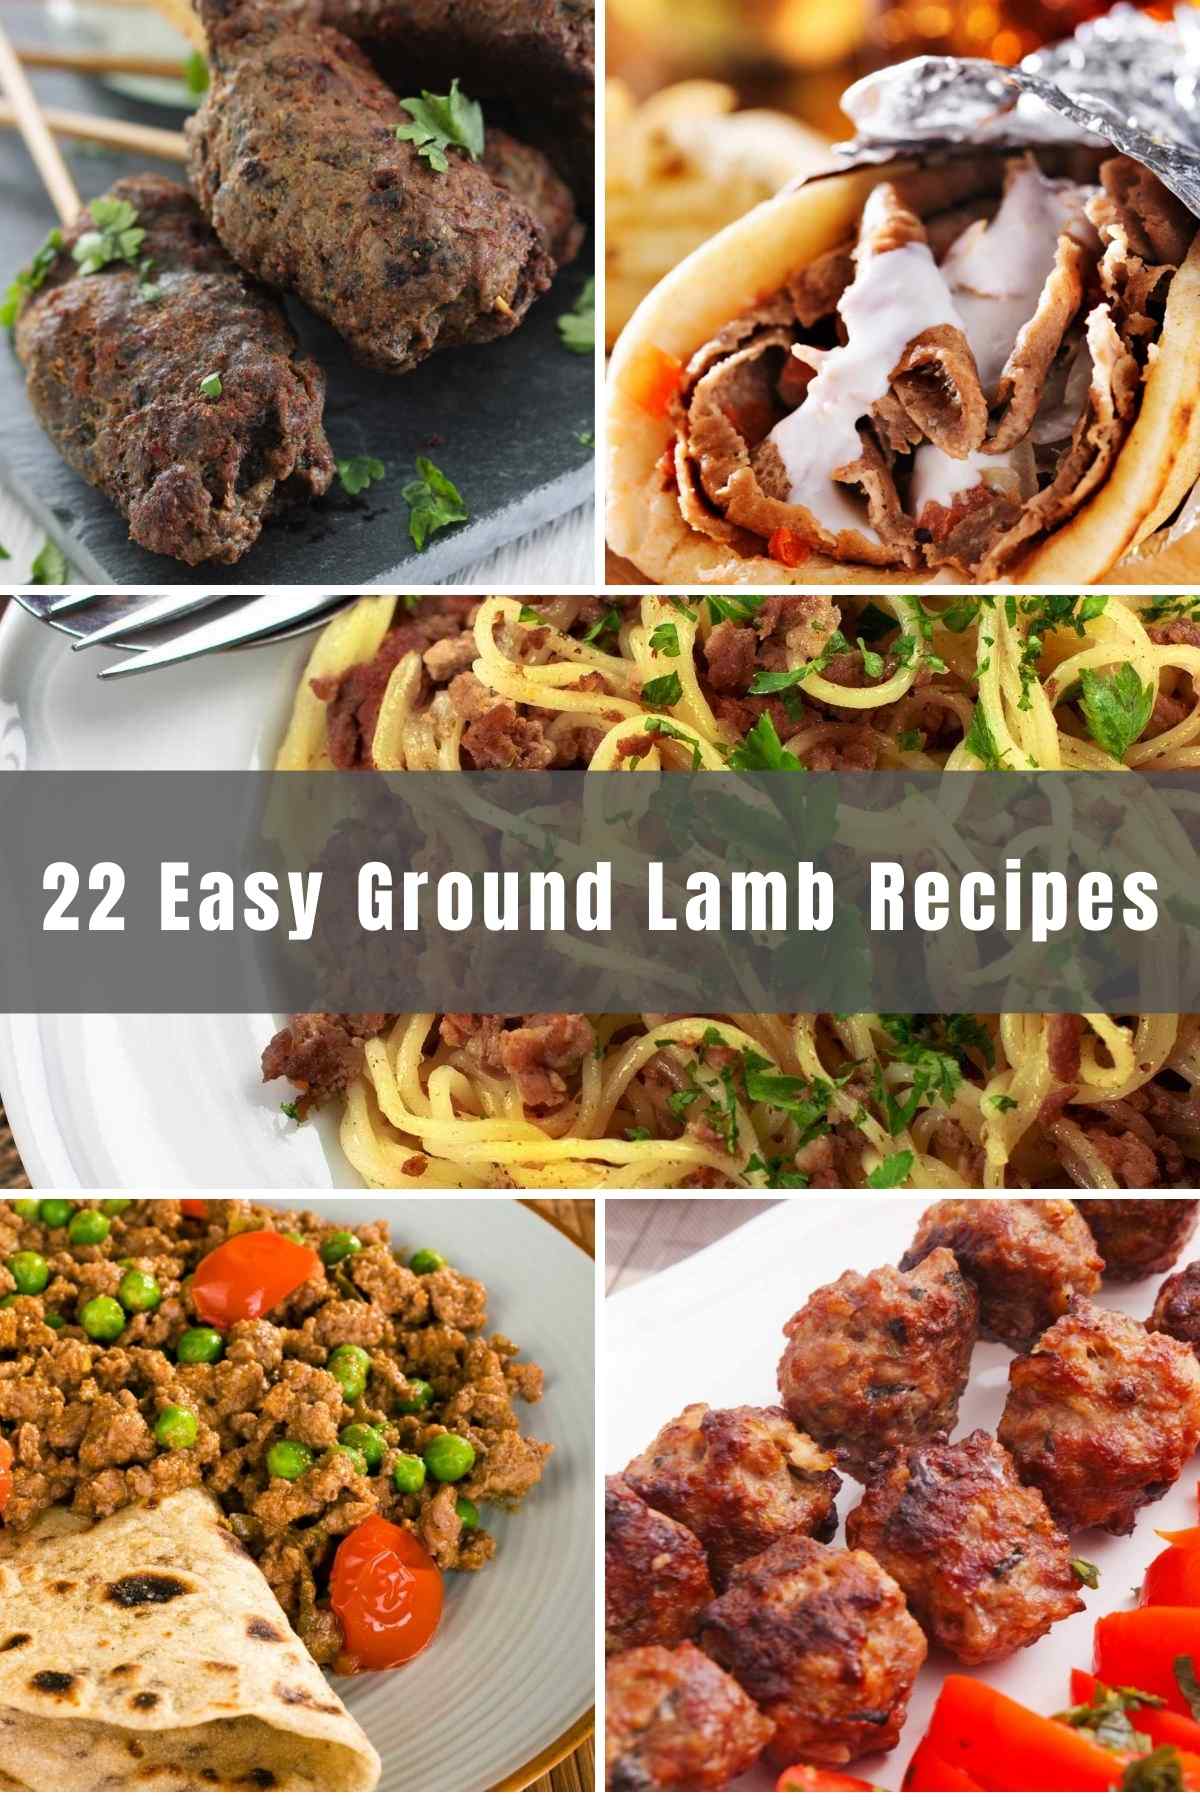 Ground lamb is a tasty alternative to ground beef and other red meats. We’ve collected 22 Easy Ground Lamb Recipes that are delicious and flavorful. From lamb shepherd’s pie to ragu and Greek lamb gyro, you’ll fall in love with this budget-friendly meat.